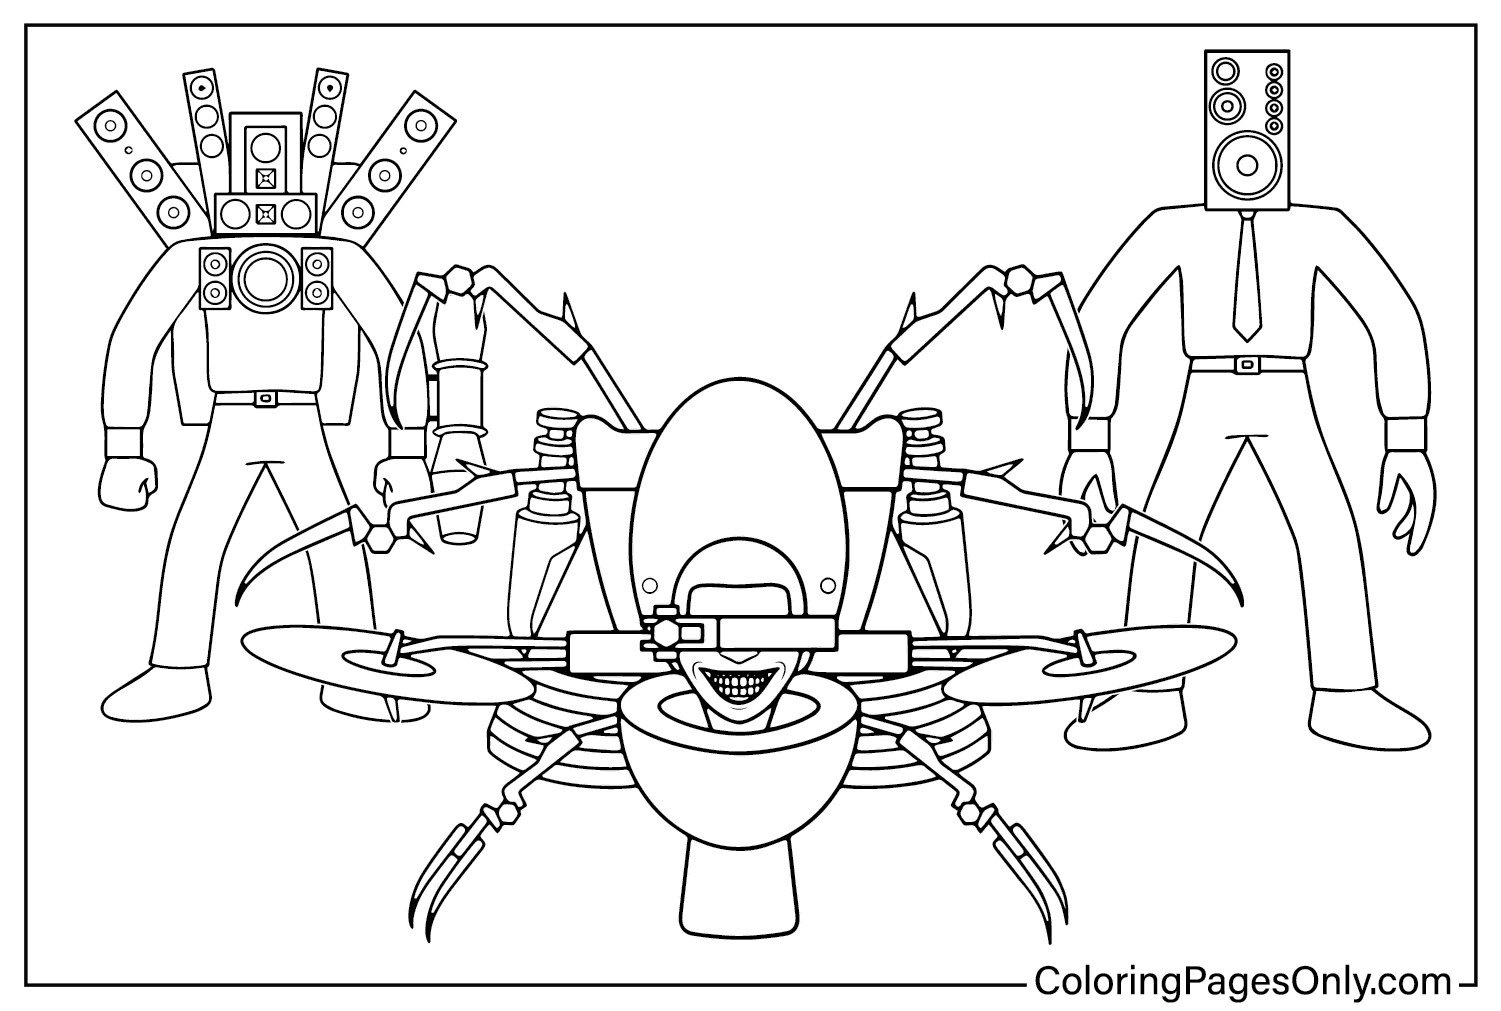 Dual Buzzsaw Mutant With Titan Speakerman Coloring Page from Dual Buzzsaw Mutant